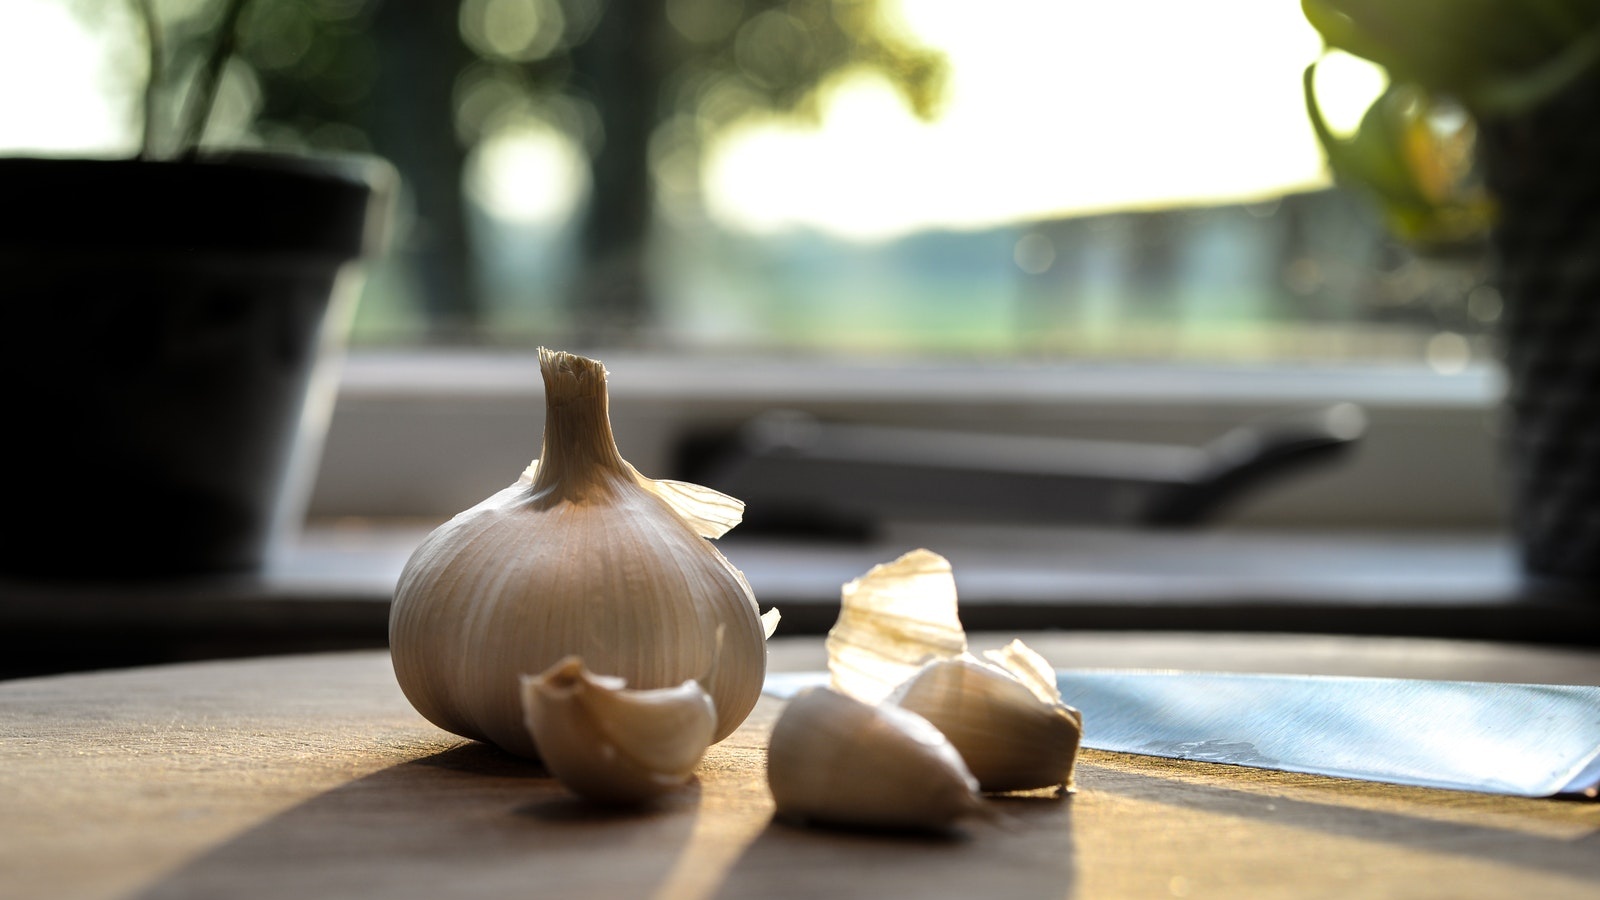 Why You Should Rest Your Chopped Garlic for 5 Minutes Before Cooking